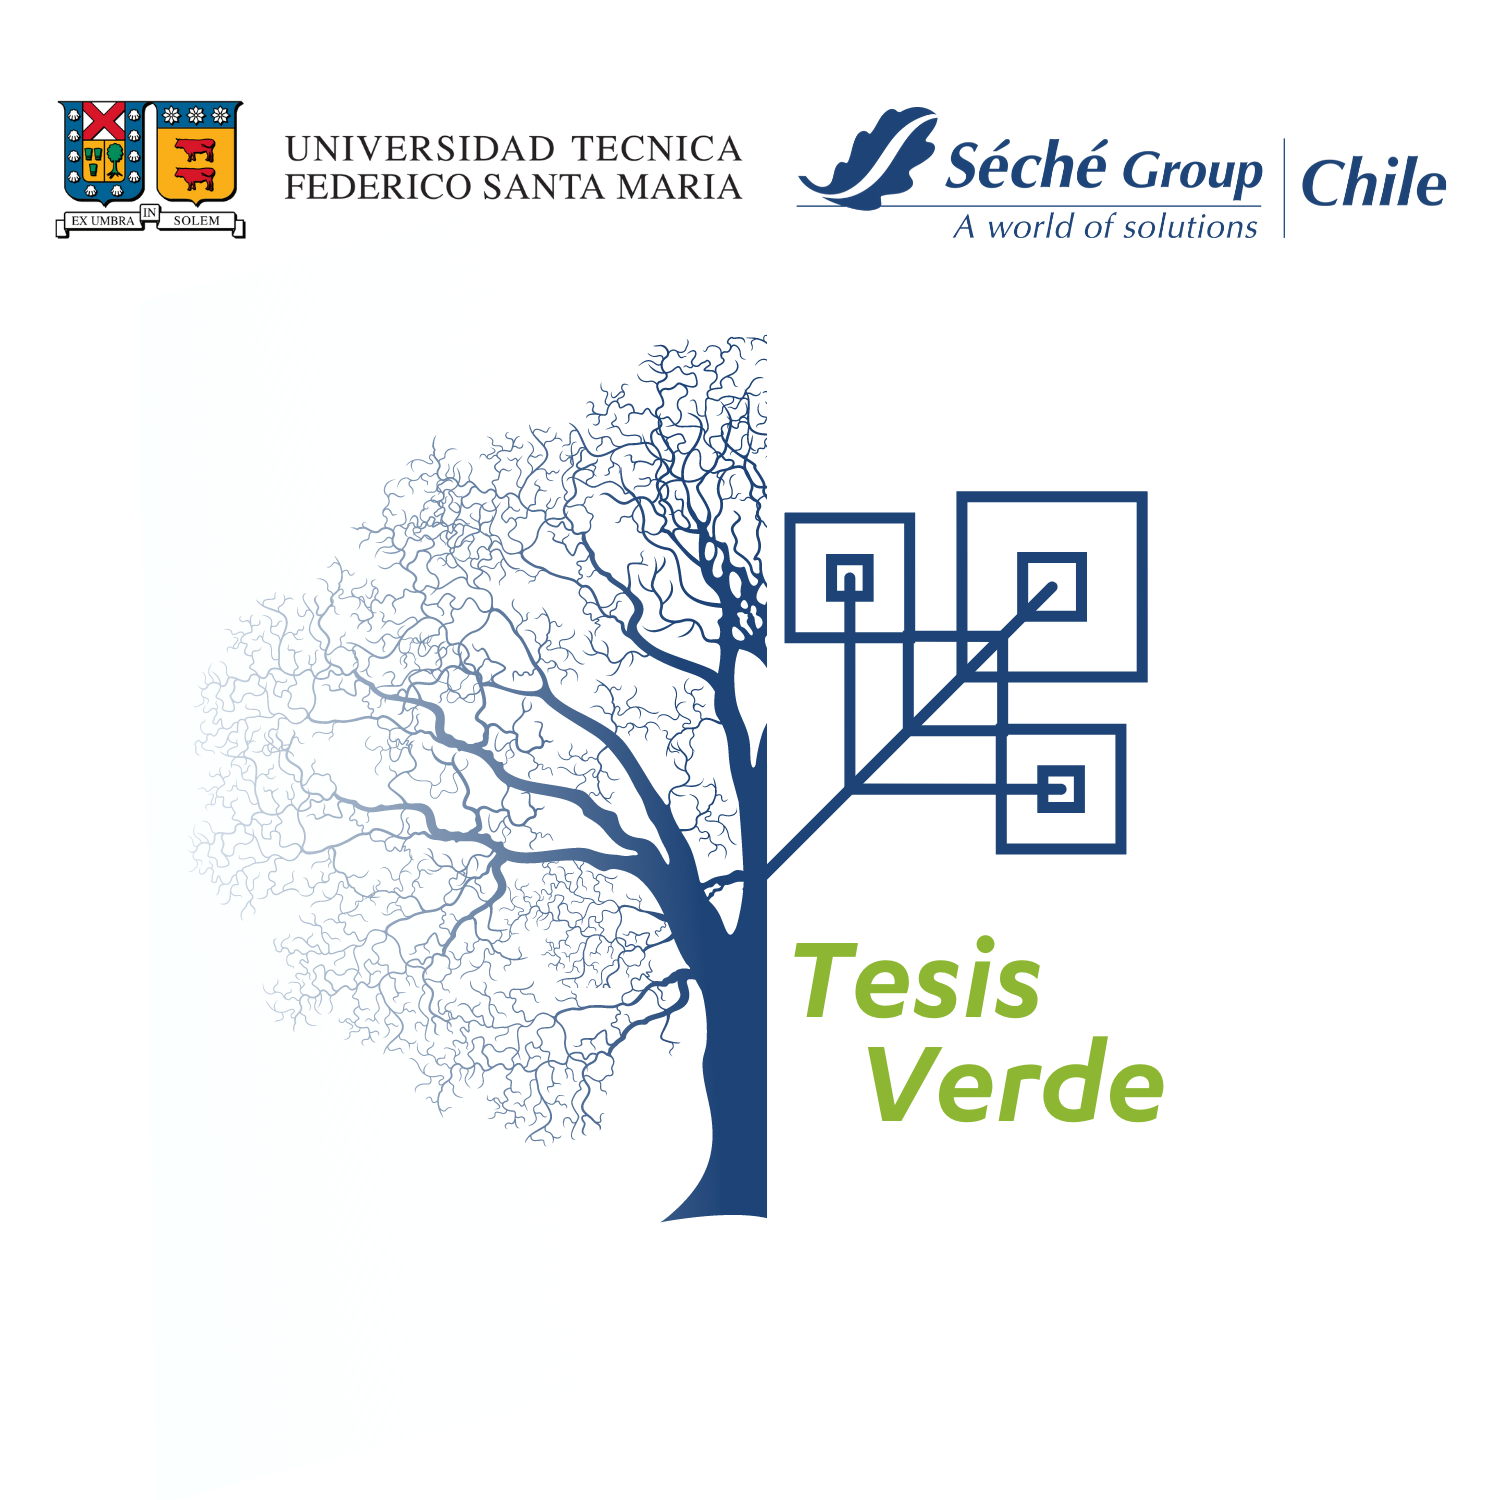 Tesis Verde Seche Group Chile